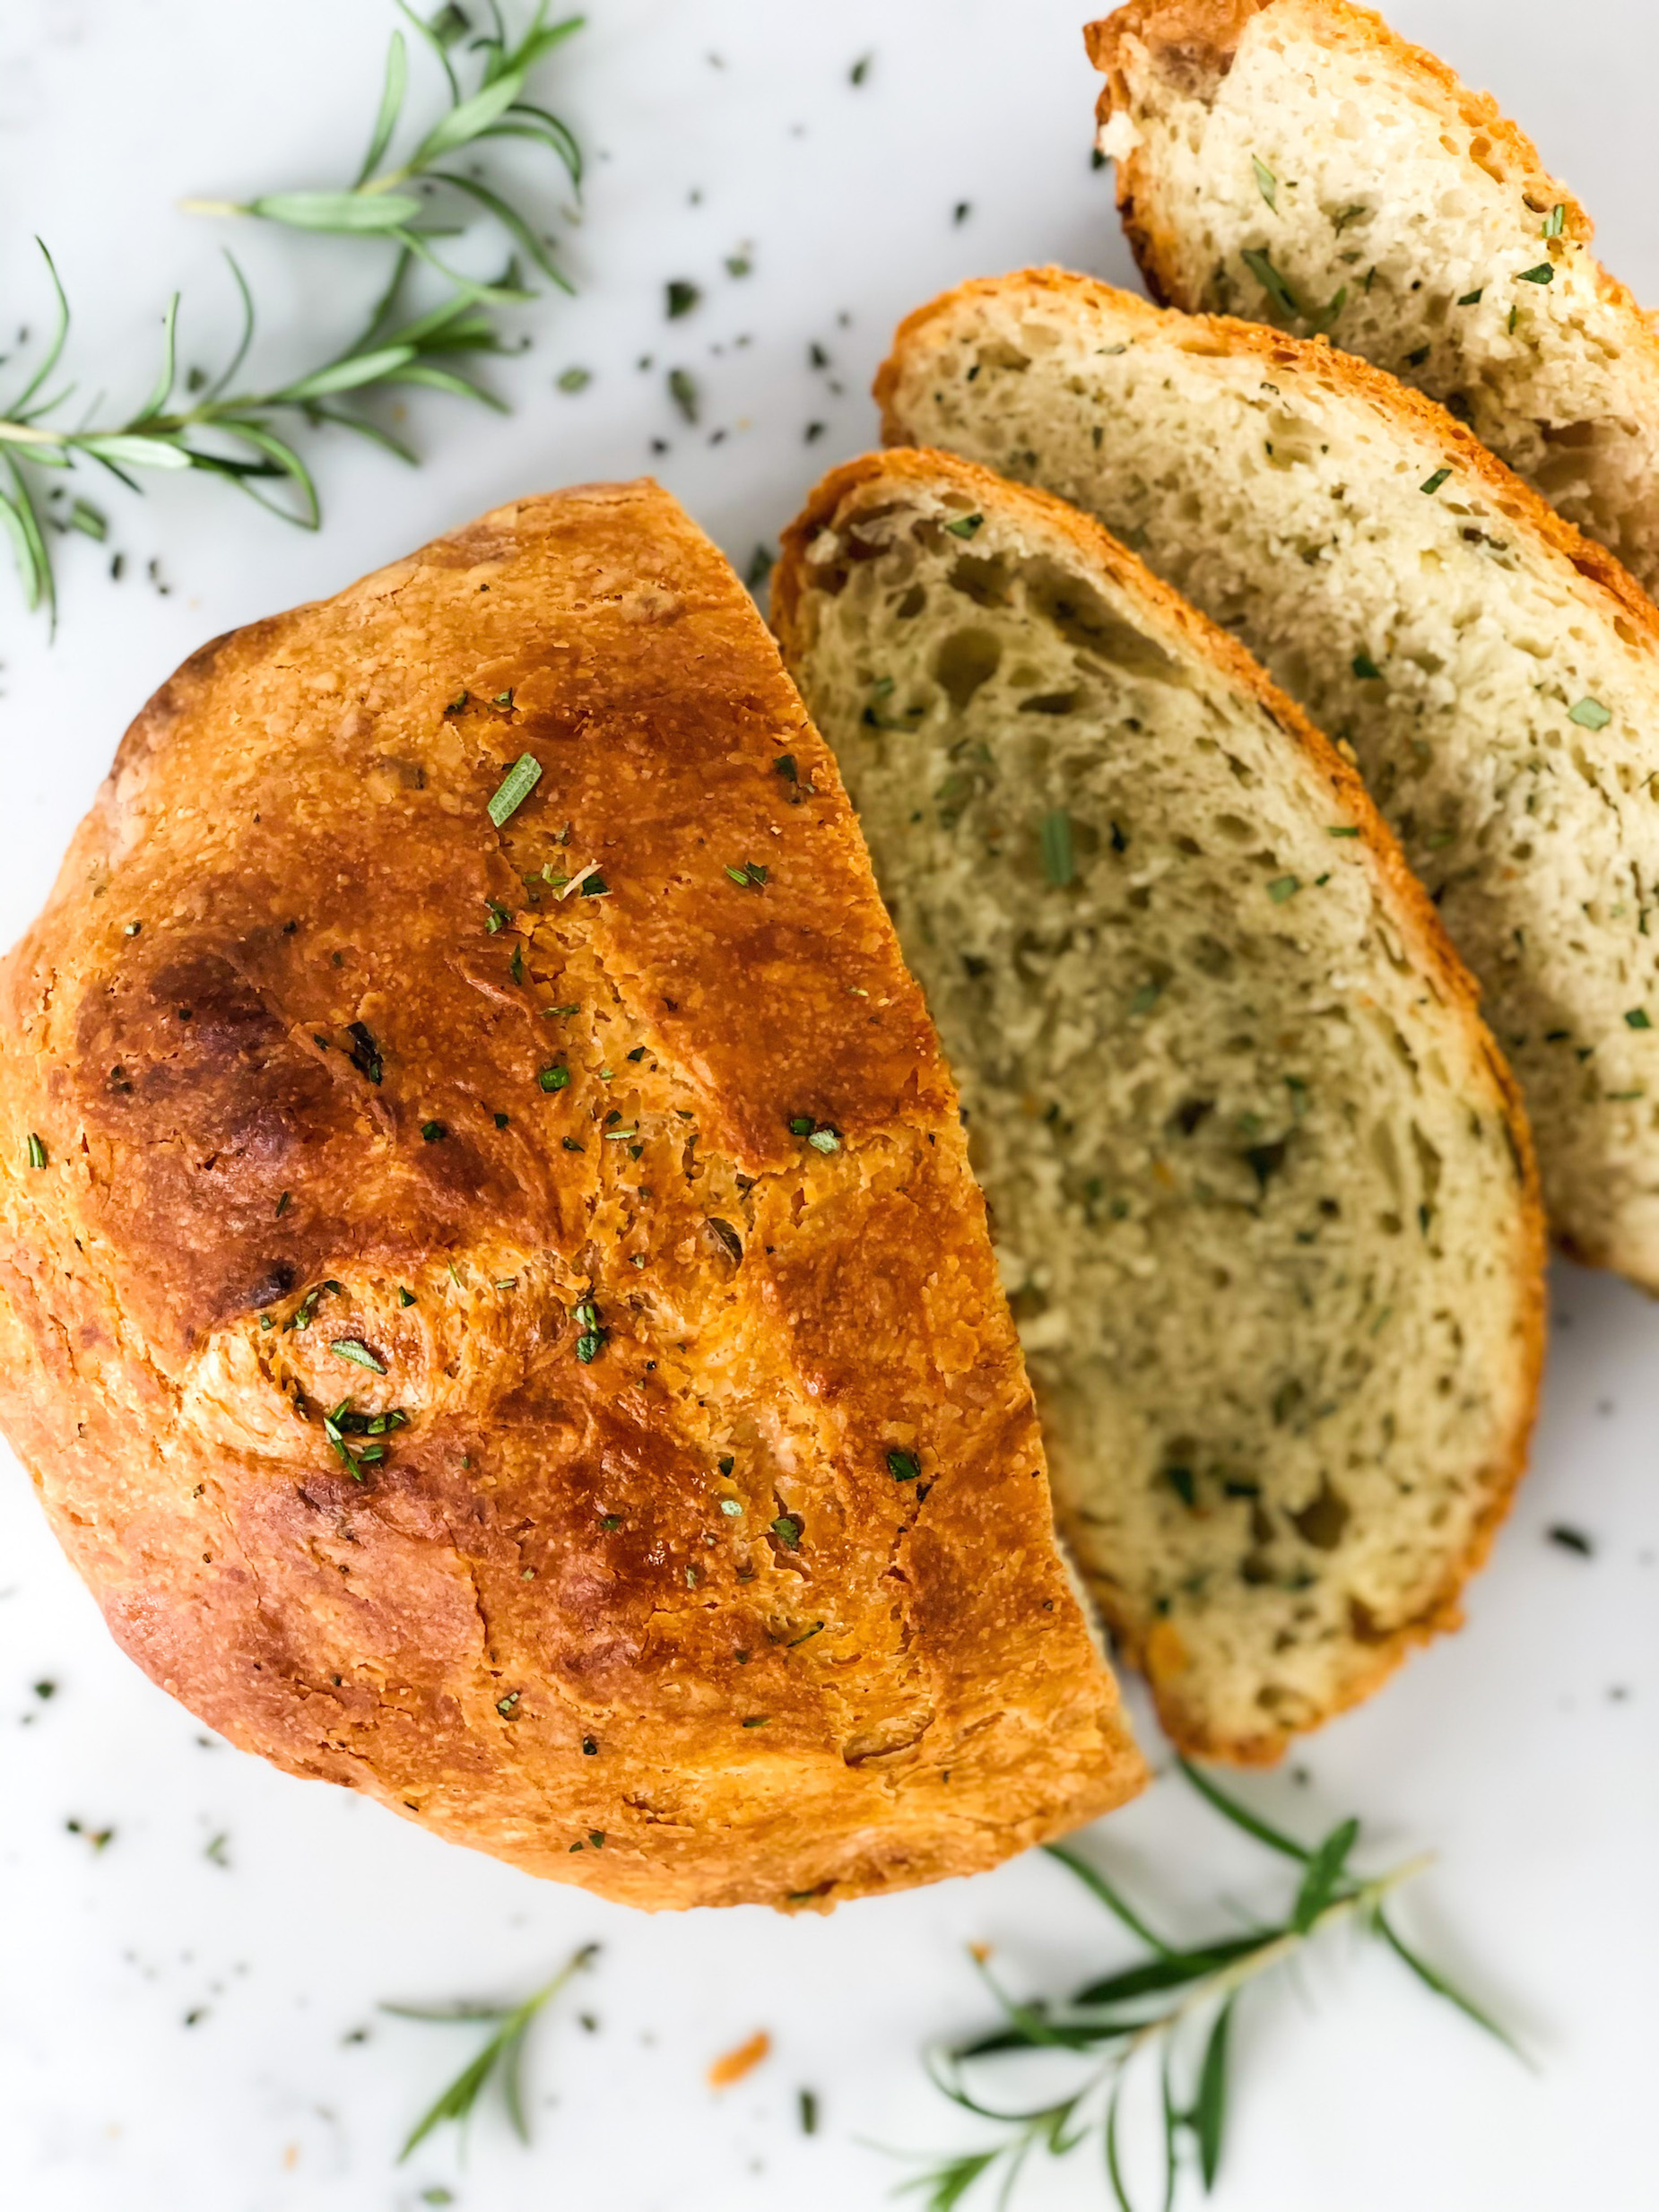 No Knead Rosemary And Olive Oil Bread - Fetty's Food Blog